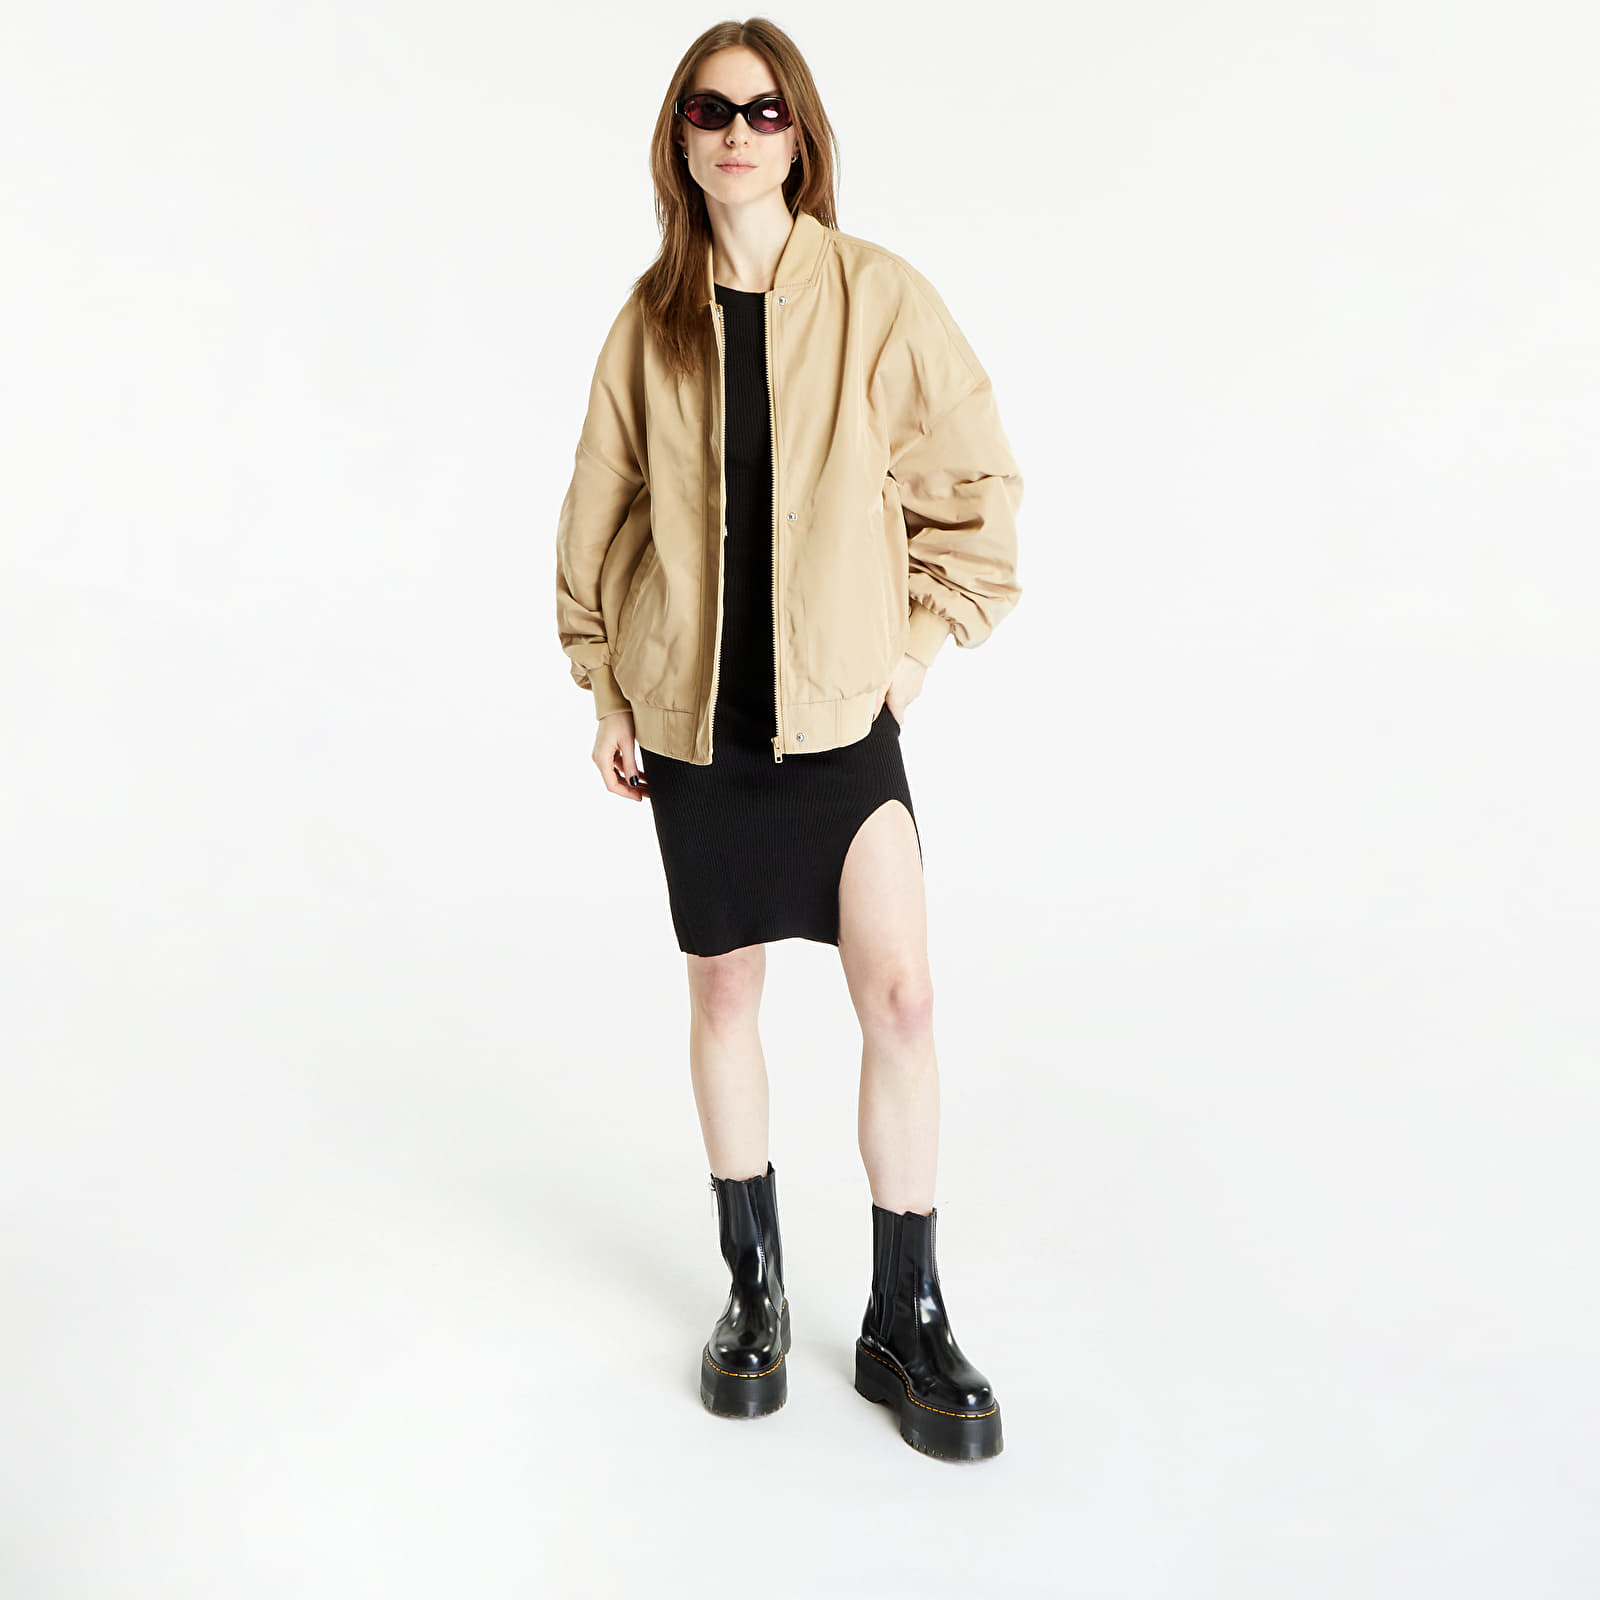 Jackets Ladies Oversized Recycled Classics Bomber Beige Urban | Union Jacket Queens Light